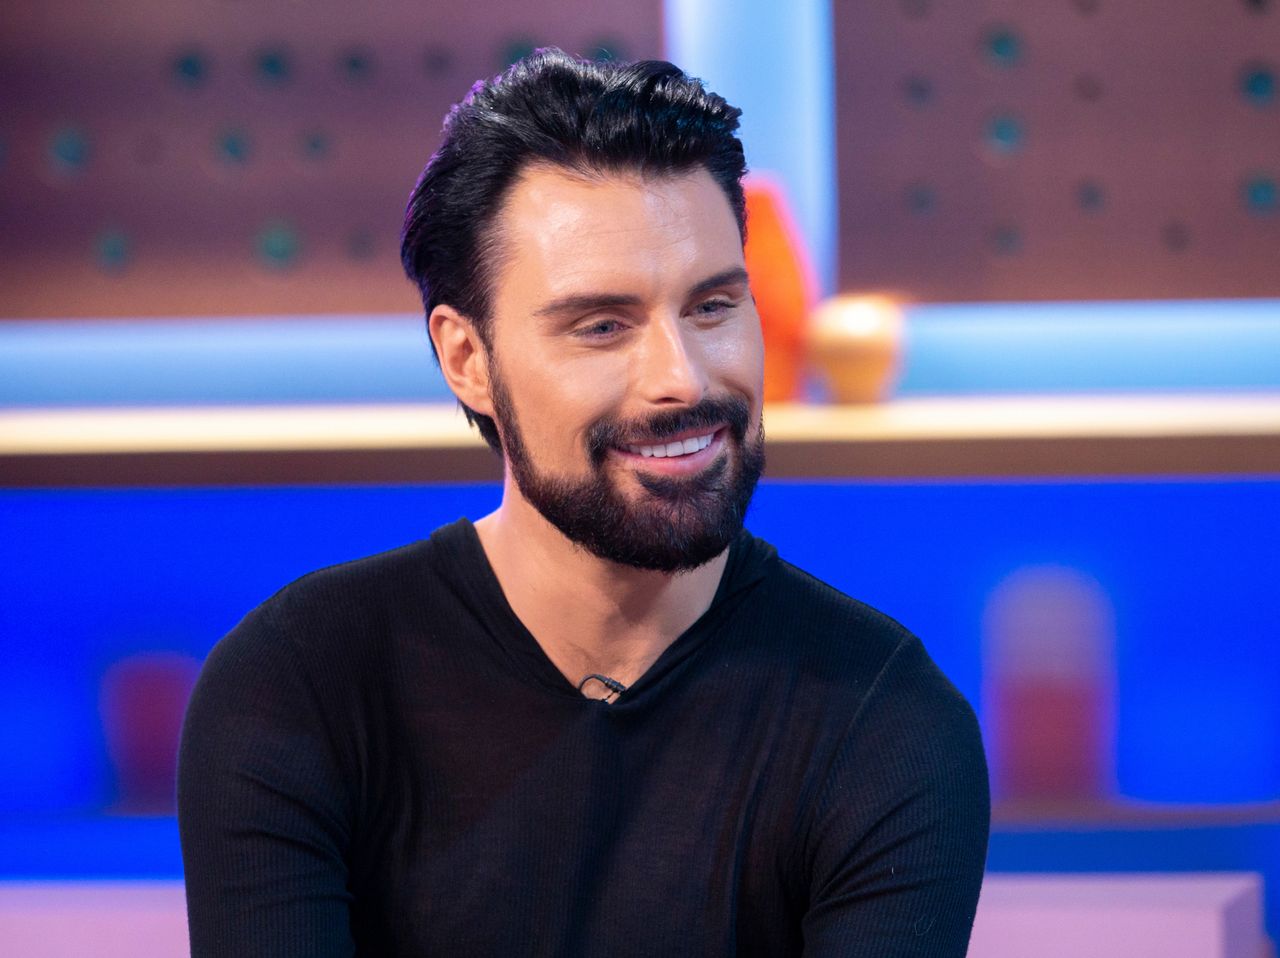 Rylan Clark during a TV interview in January 2019